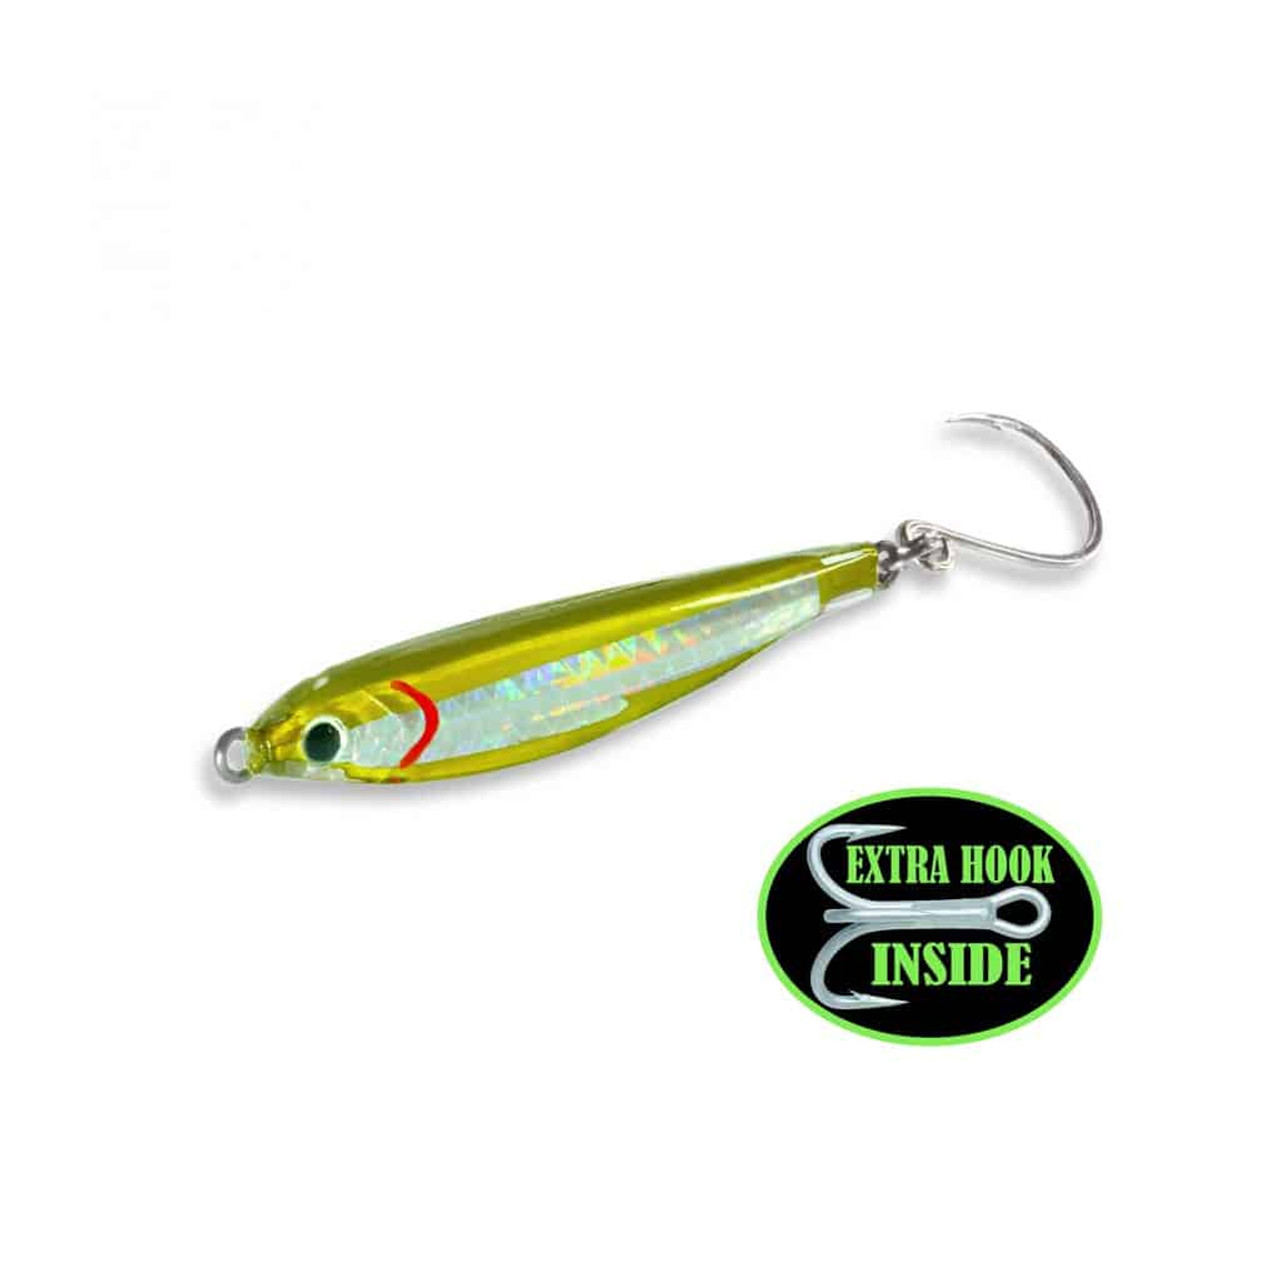 Fat Cow Lures Fat Minnow Epoxy Resin Jig 2.5 Inch 1 Ounce Olive Green